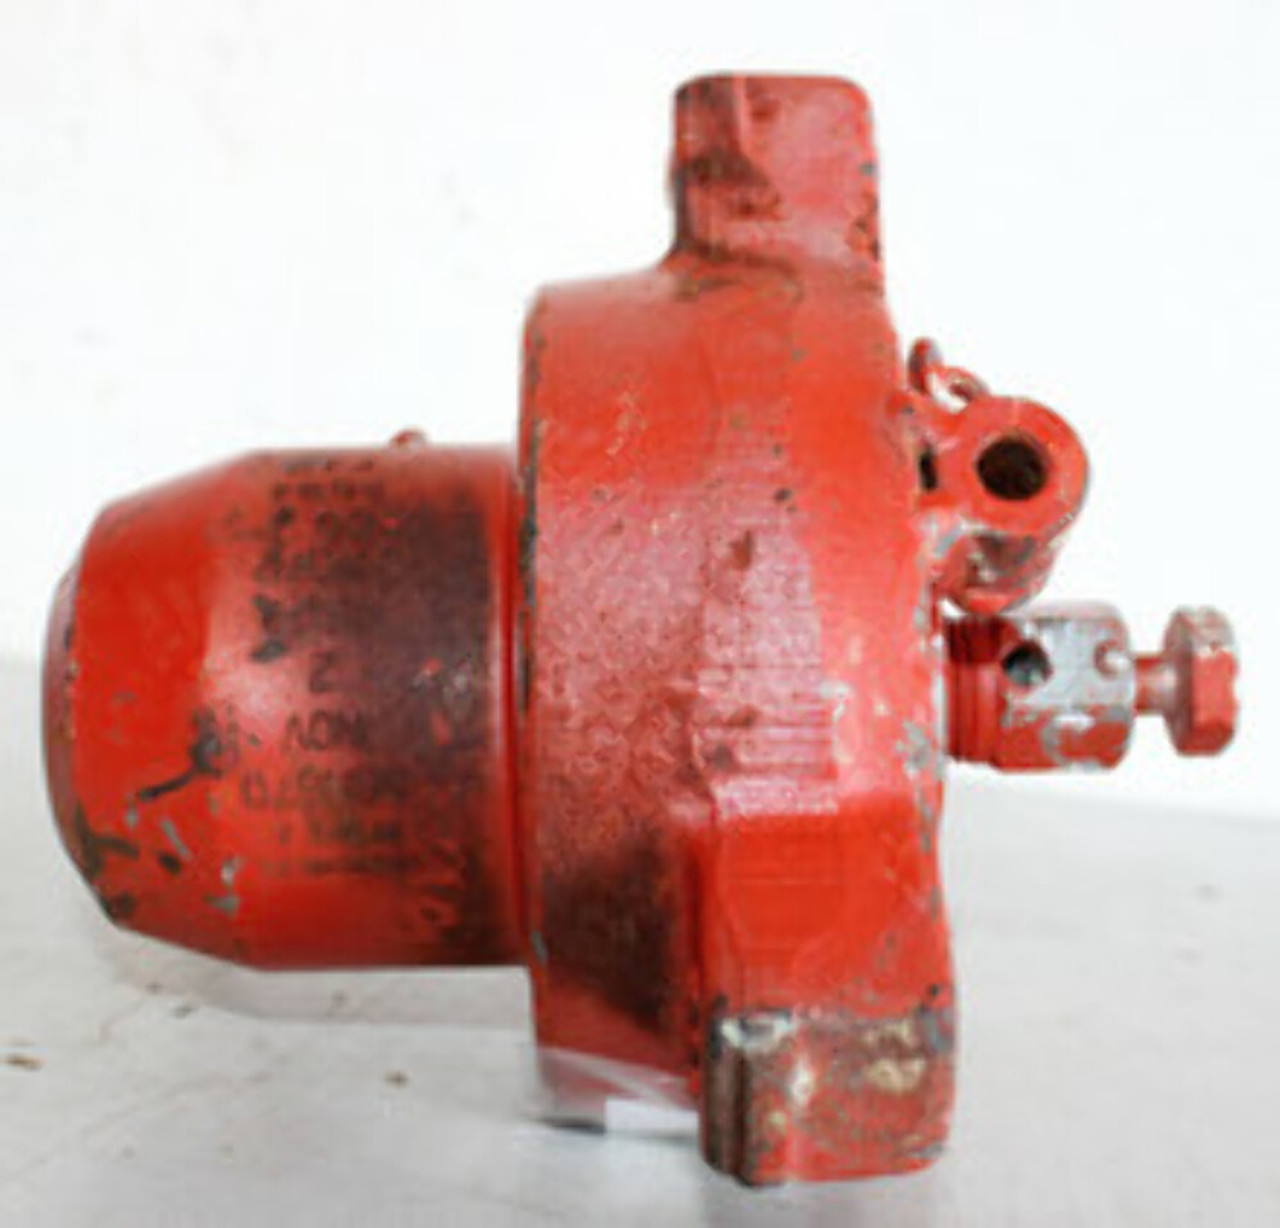 YALE FIG210 Hammer Union Diameter: 2 Inch 4000CWP K18 ABN670 1500 MAWP 3100PSI